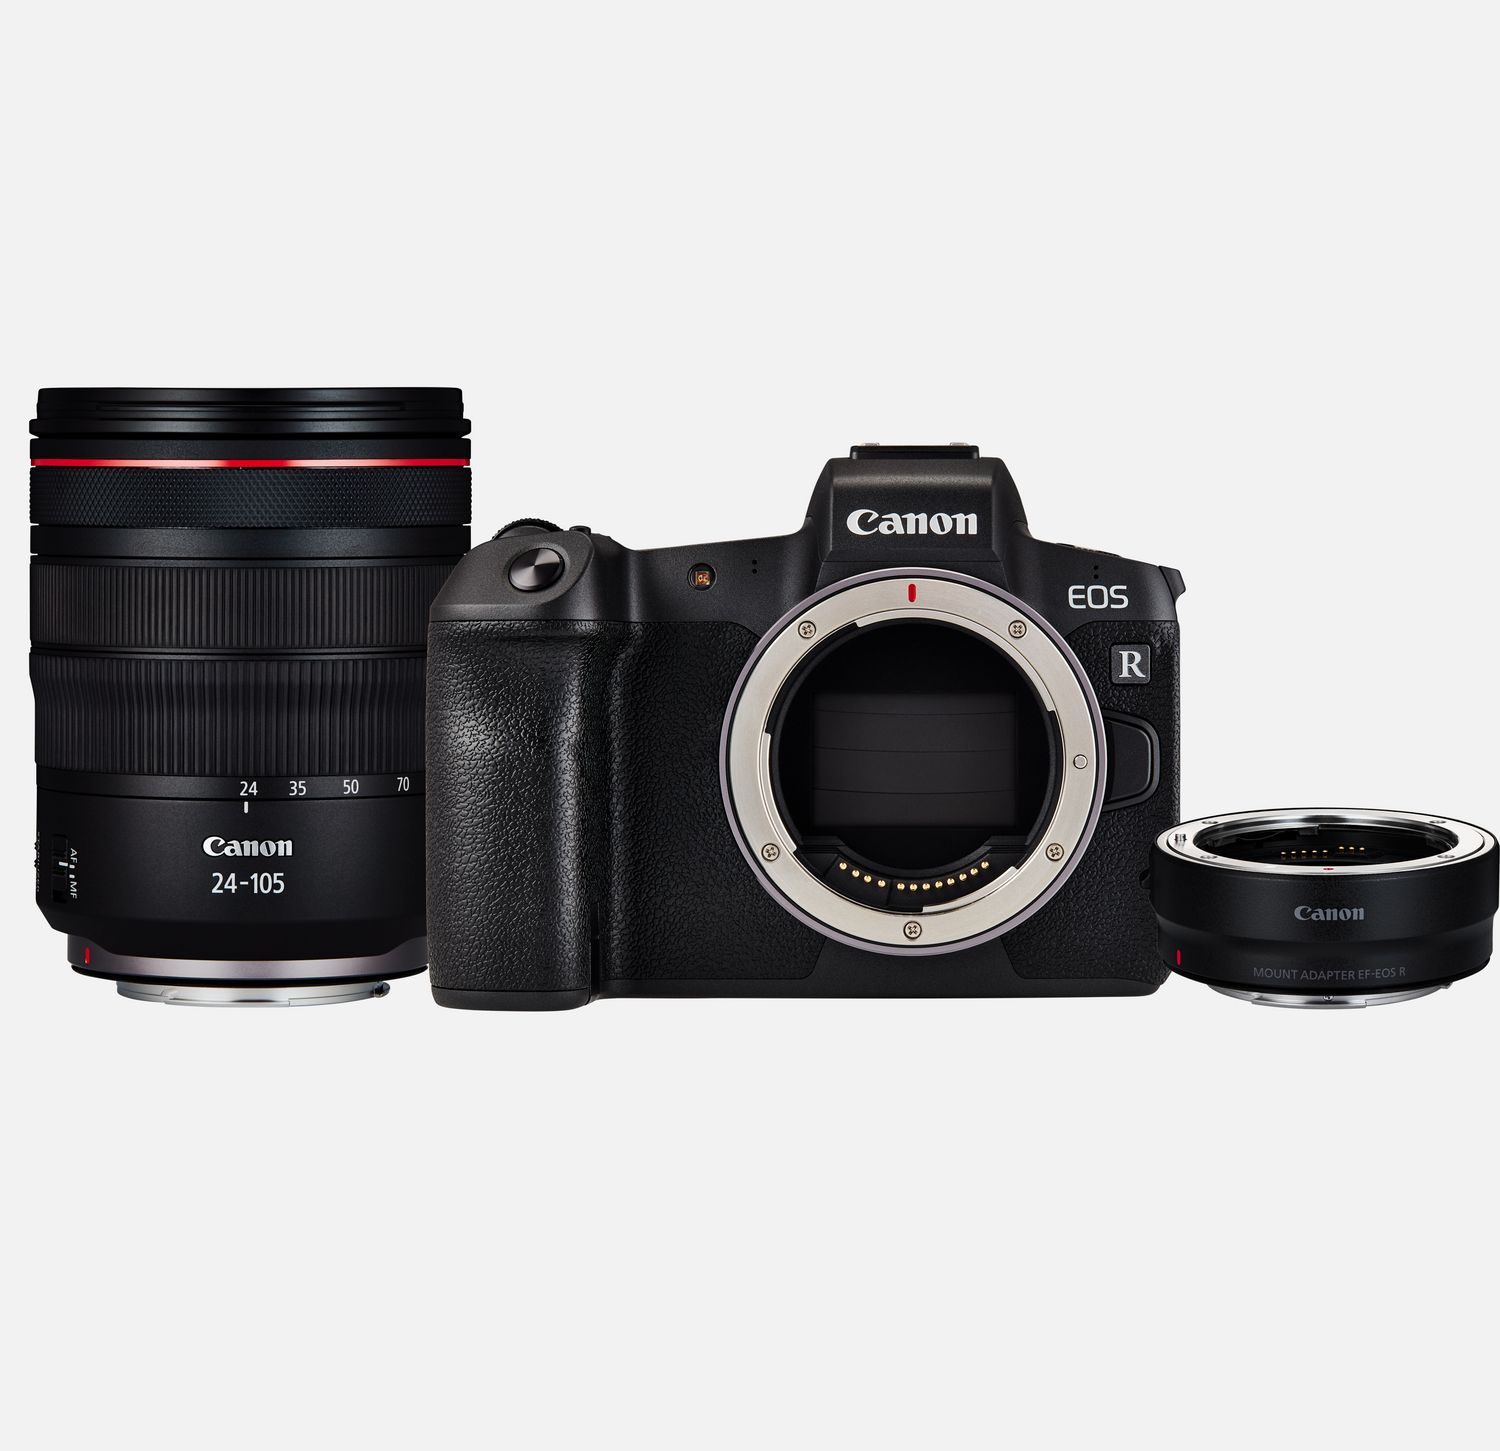 bust banana rely Buy Canon EOS R Body + RF 24-105mm F4L IS USM Lens + Mount Adapter EF-EOS R  in Wi-Fi Cameras — Canon UAE Store